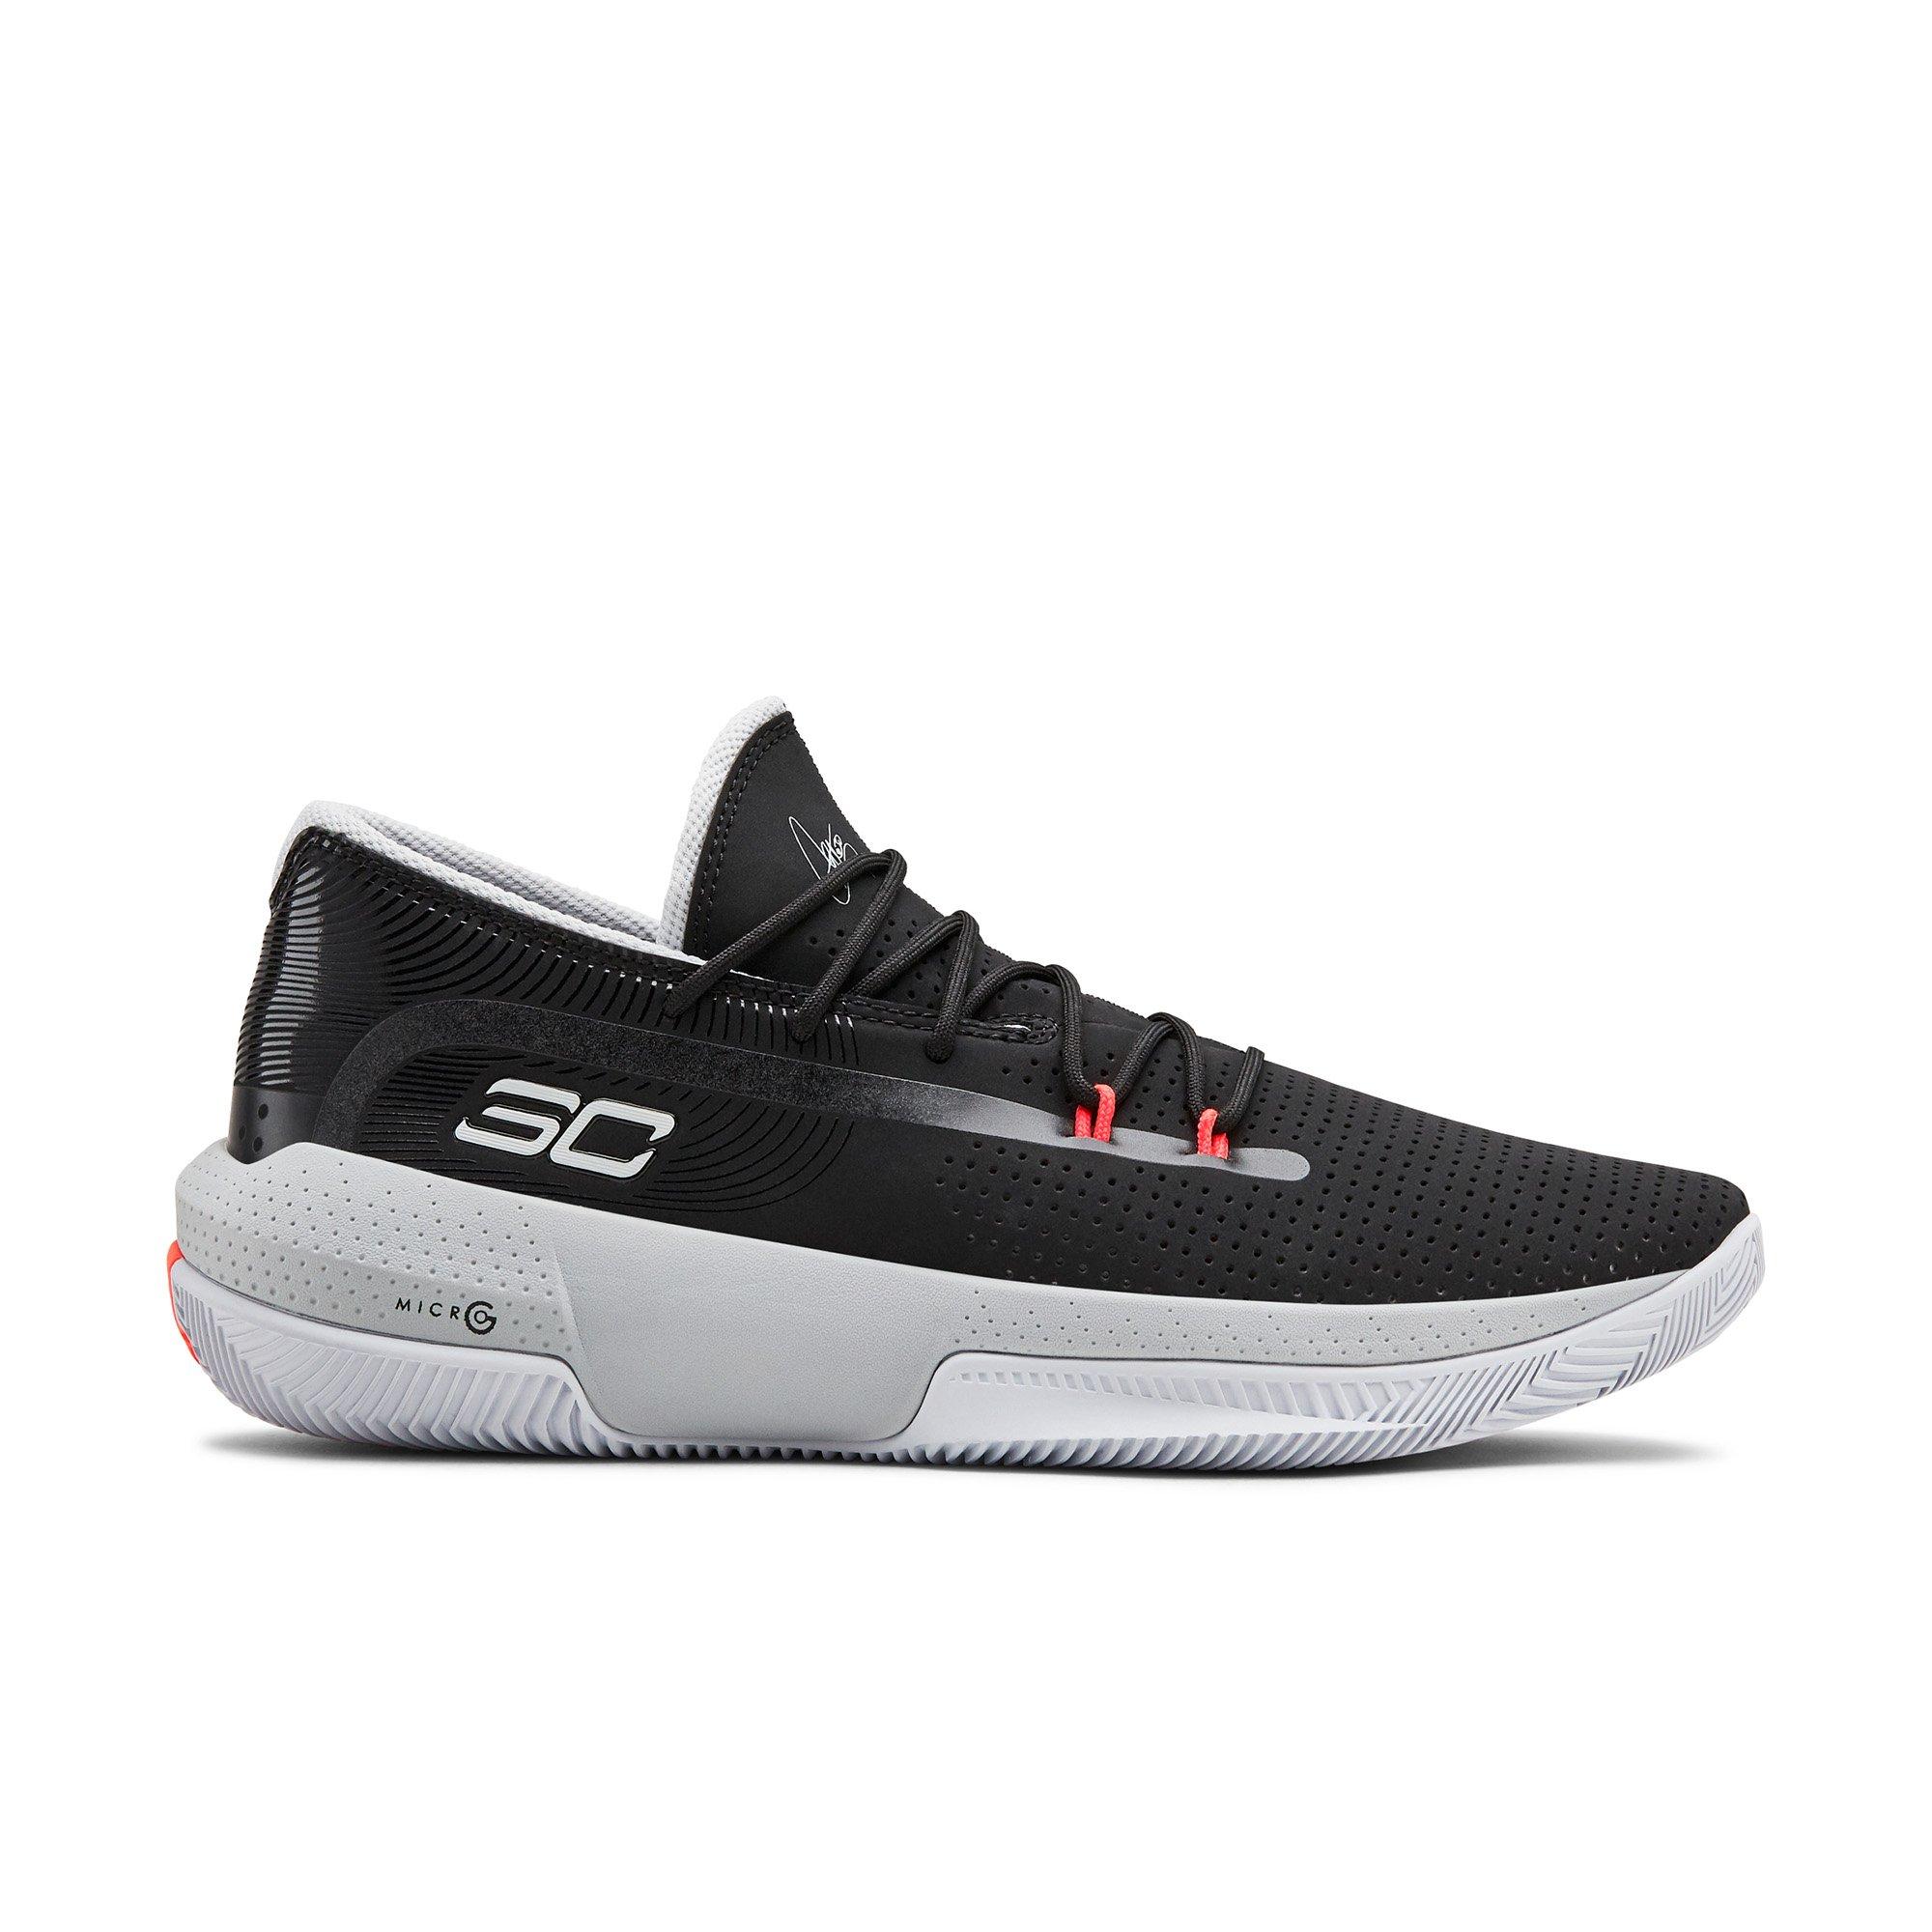 Steph Curry Shoes | Under Armour Shoes 